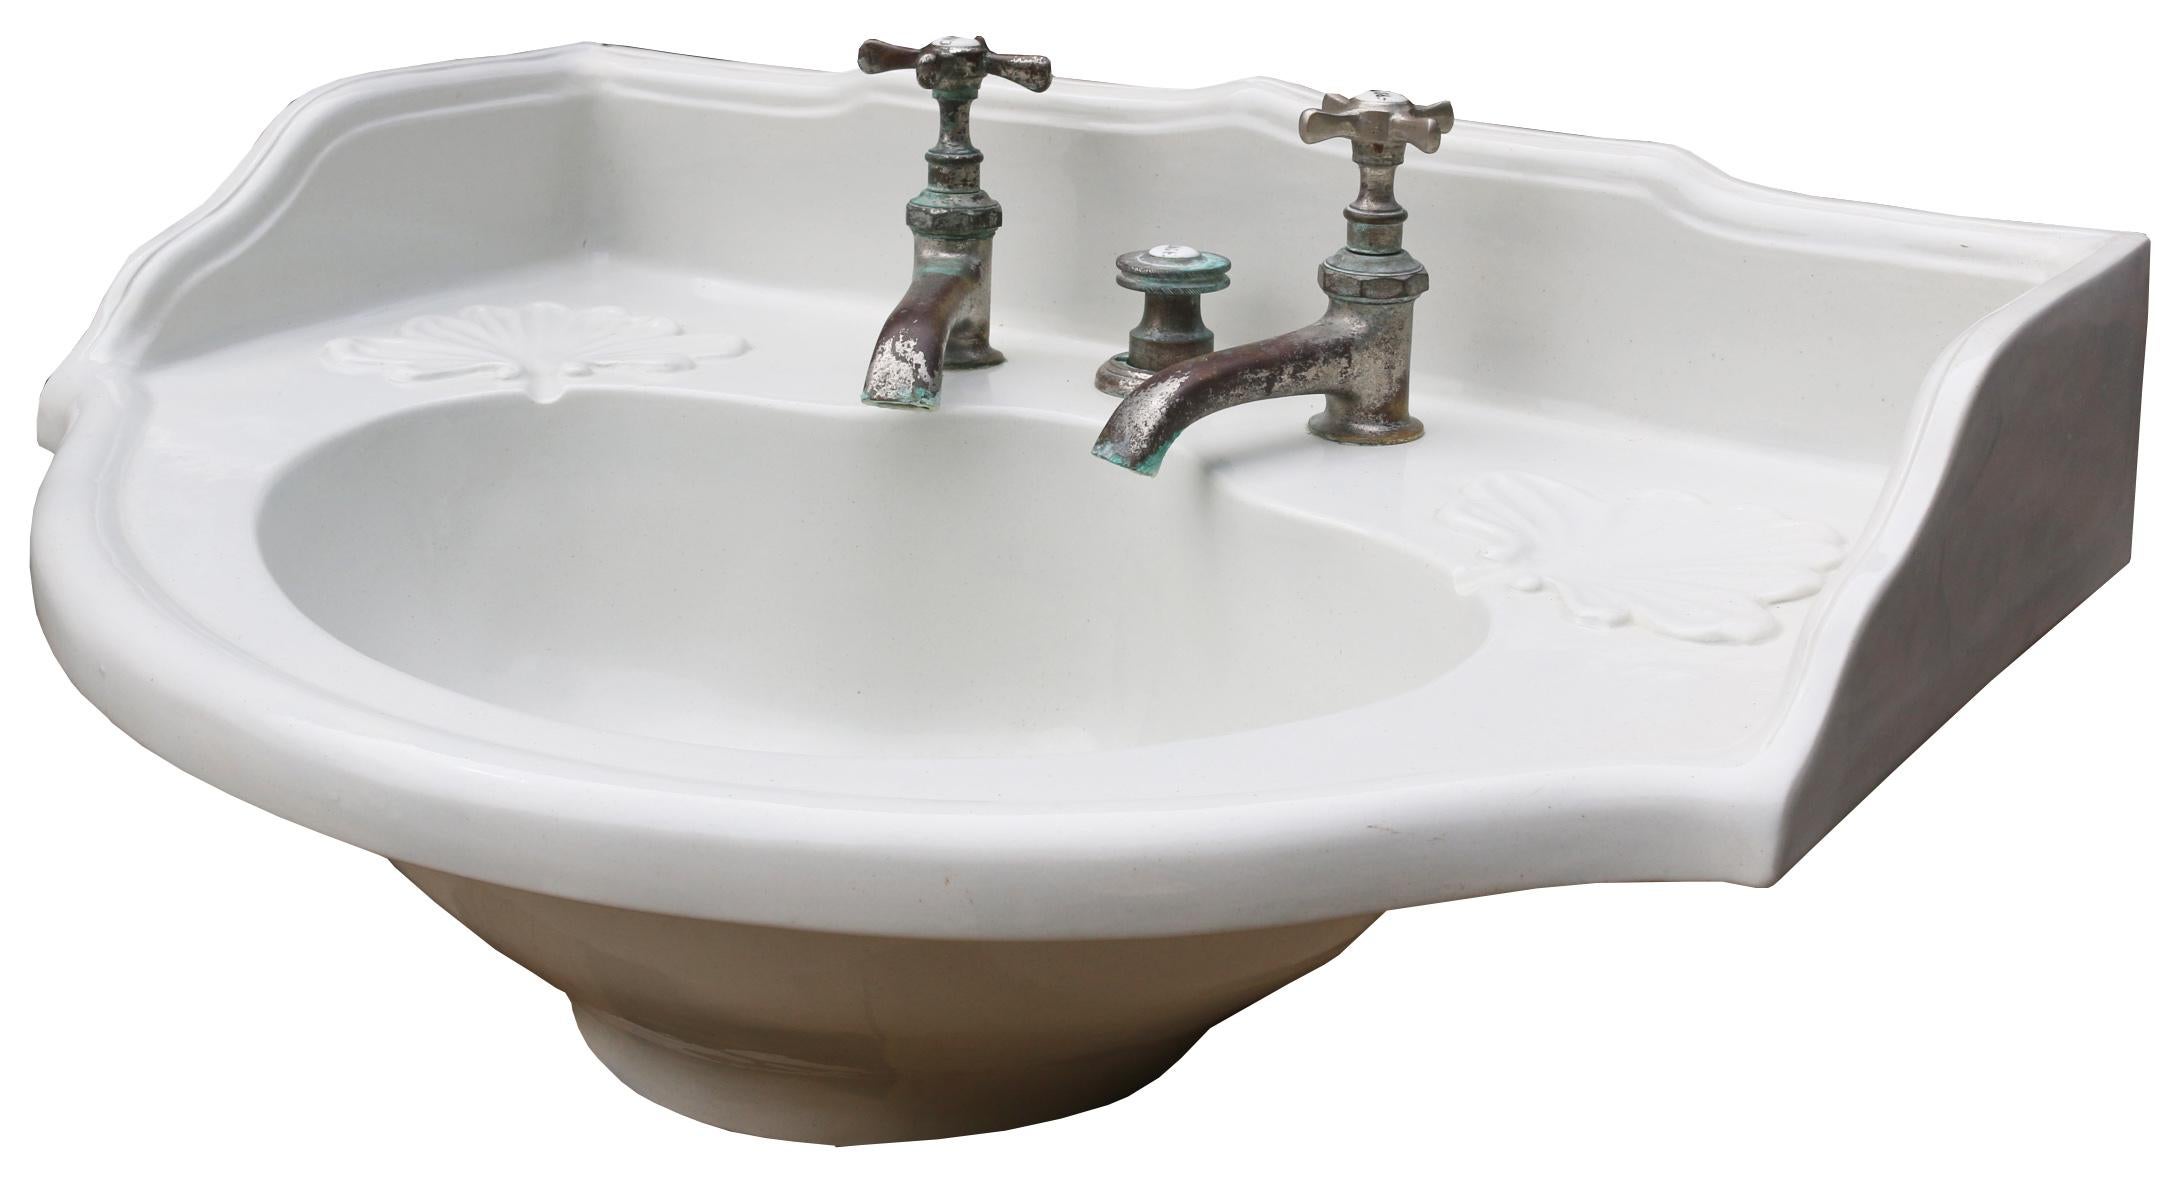 This basin has original taps and plunger waste. It could be set into/onto a counter, or supported on wall hung brackets. Originally from a property in Saint-Tropez.